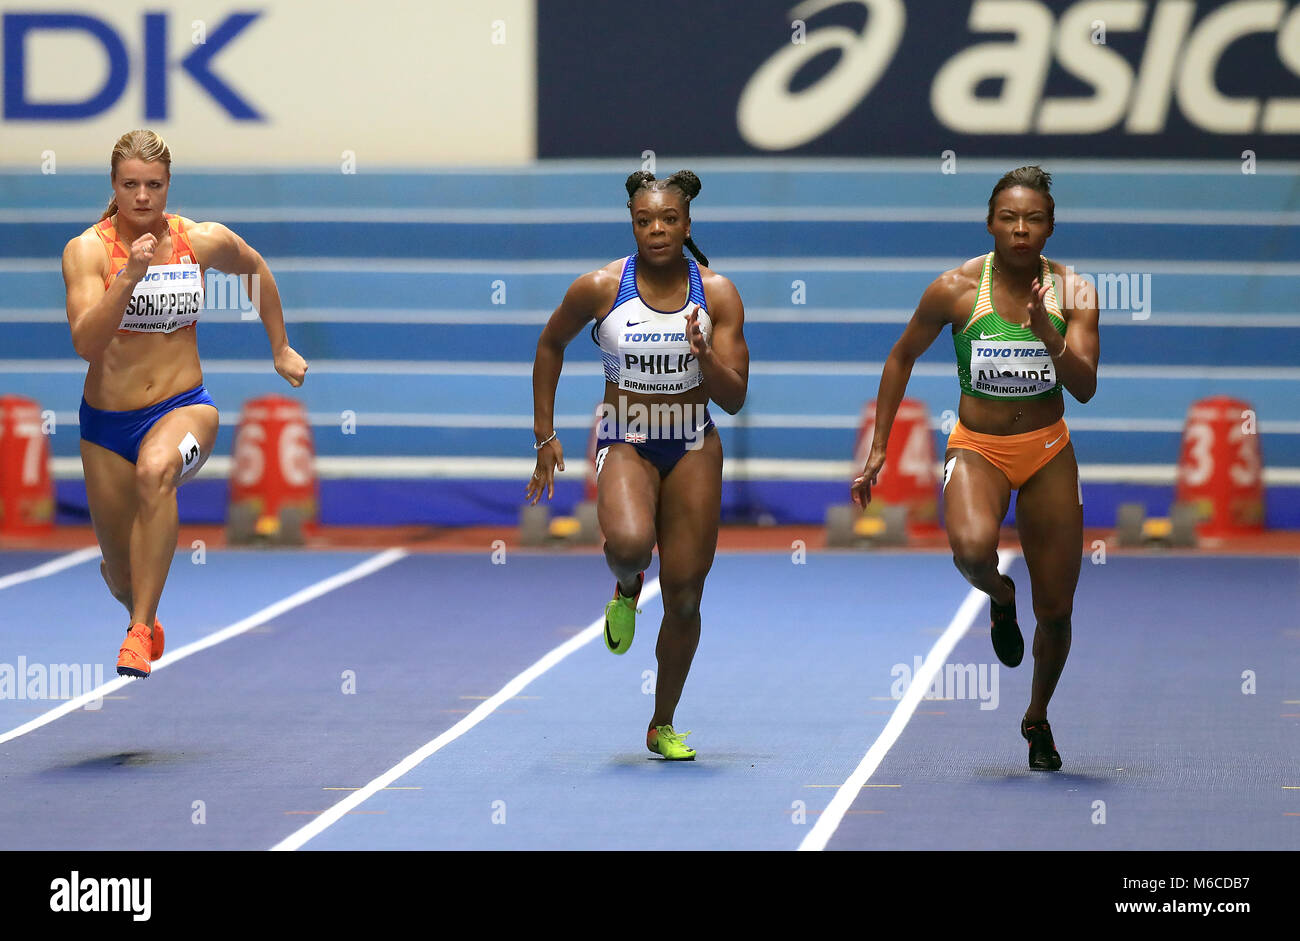 Ivory Coast's Murielle Ahoure (right) wins the Women's 60m to set a new world leading record ahead of Netherlands' Dafne Schippers (left) in third and Great Britain's Asha Philip in fifth during day two of the 2018 IAAF Indoor World Championships at The Arena Birmingham. Stock Photo